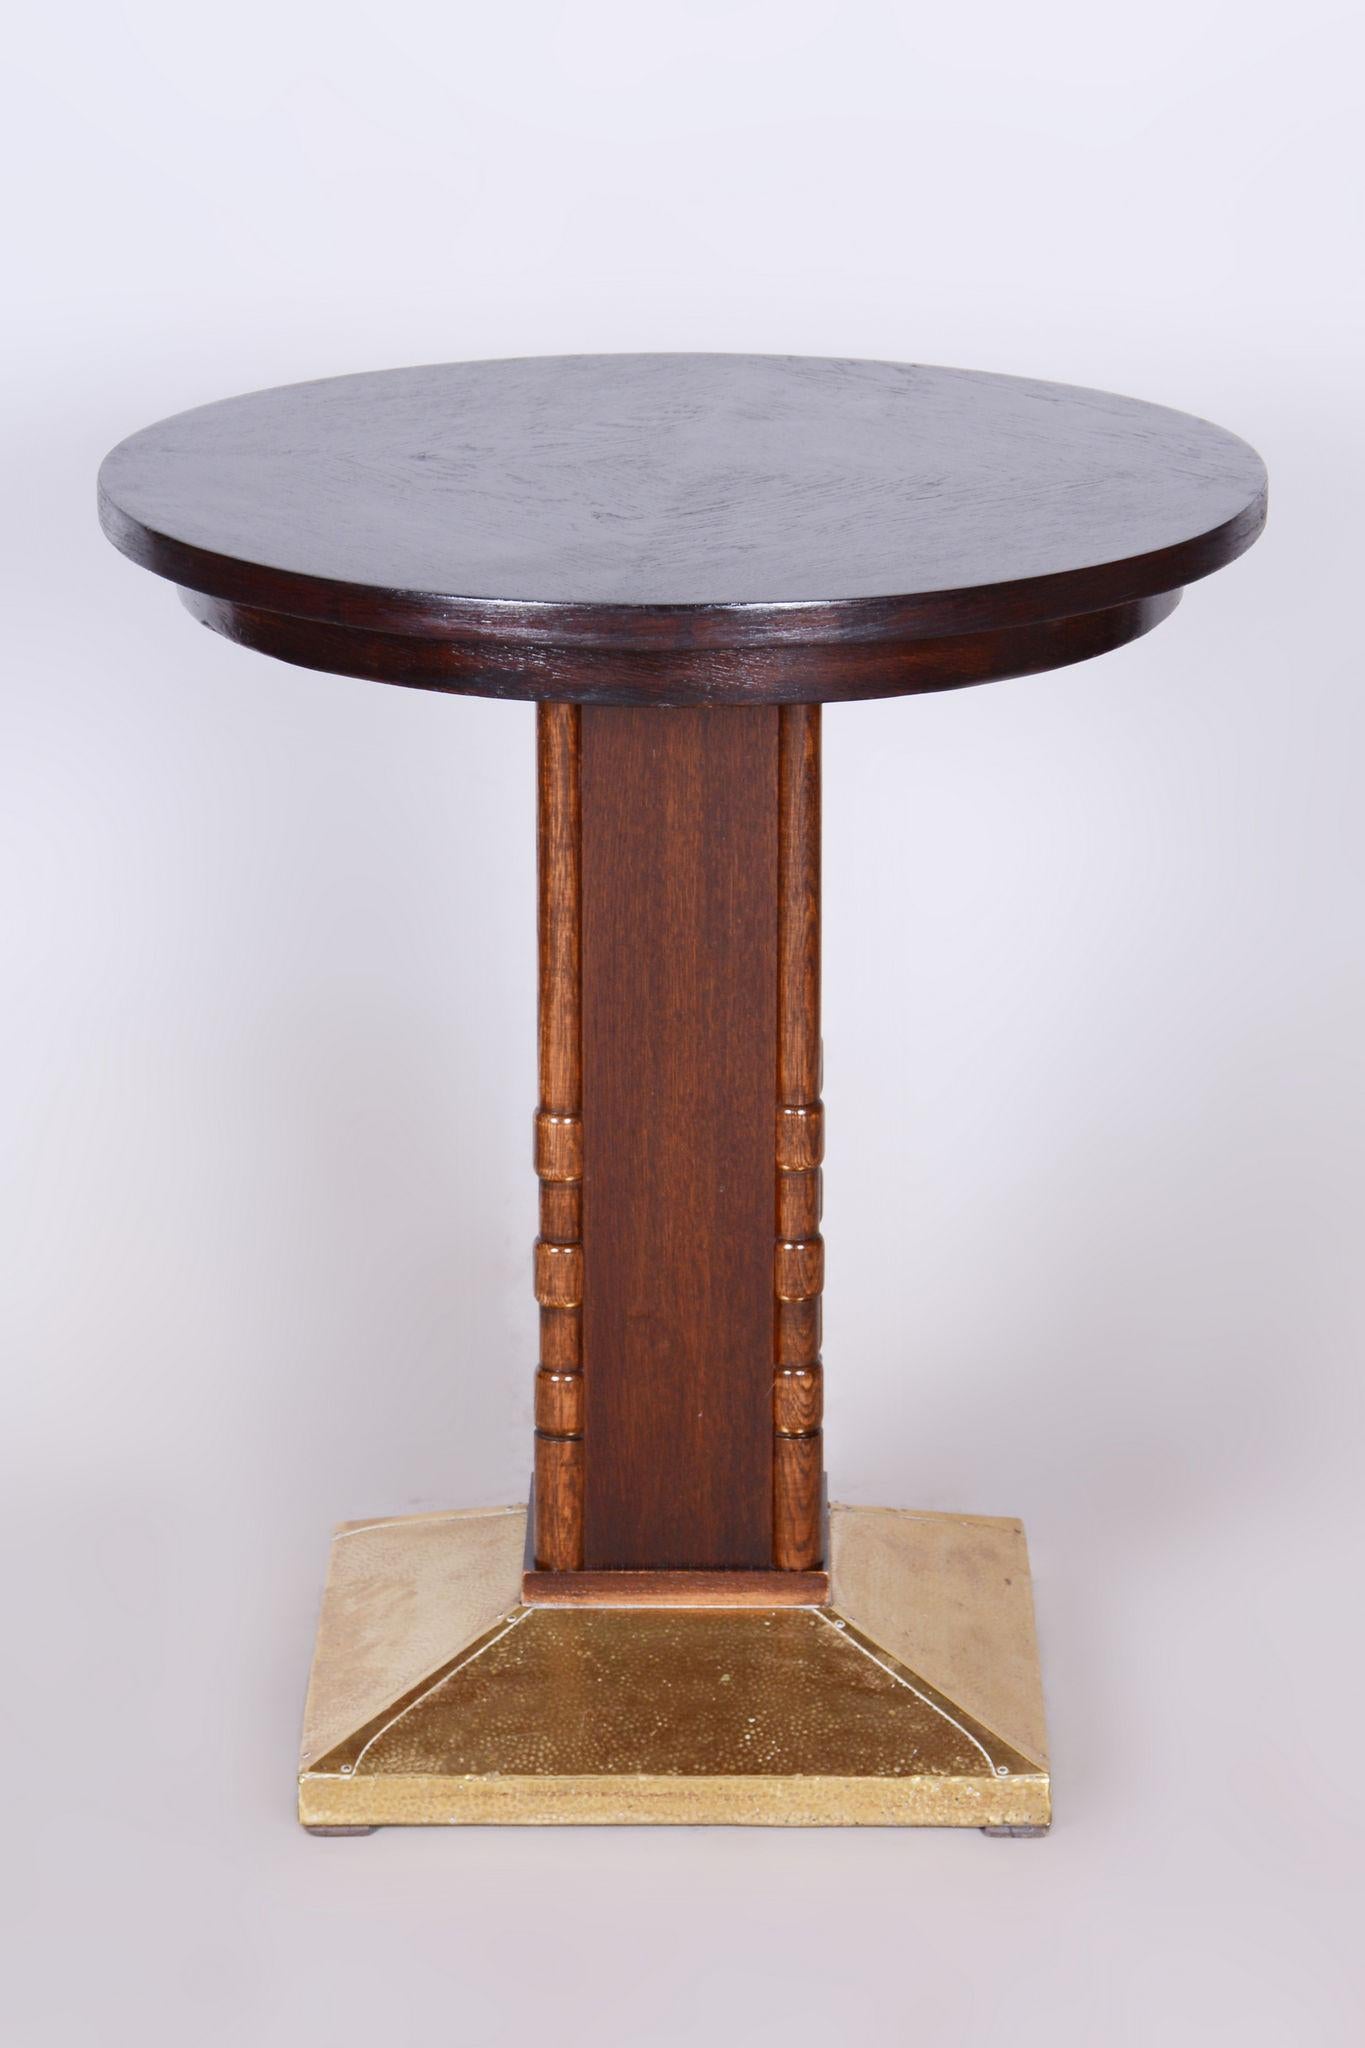 Early 20th Century Restored Art Deco Small Table, Oak, Brass, Revived Polish, Czechia, 1920s For Sale